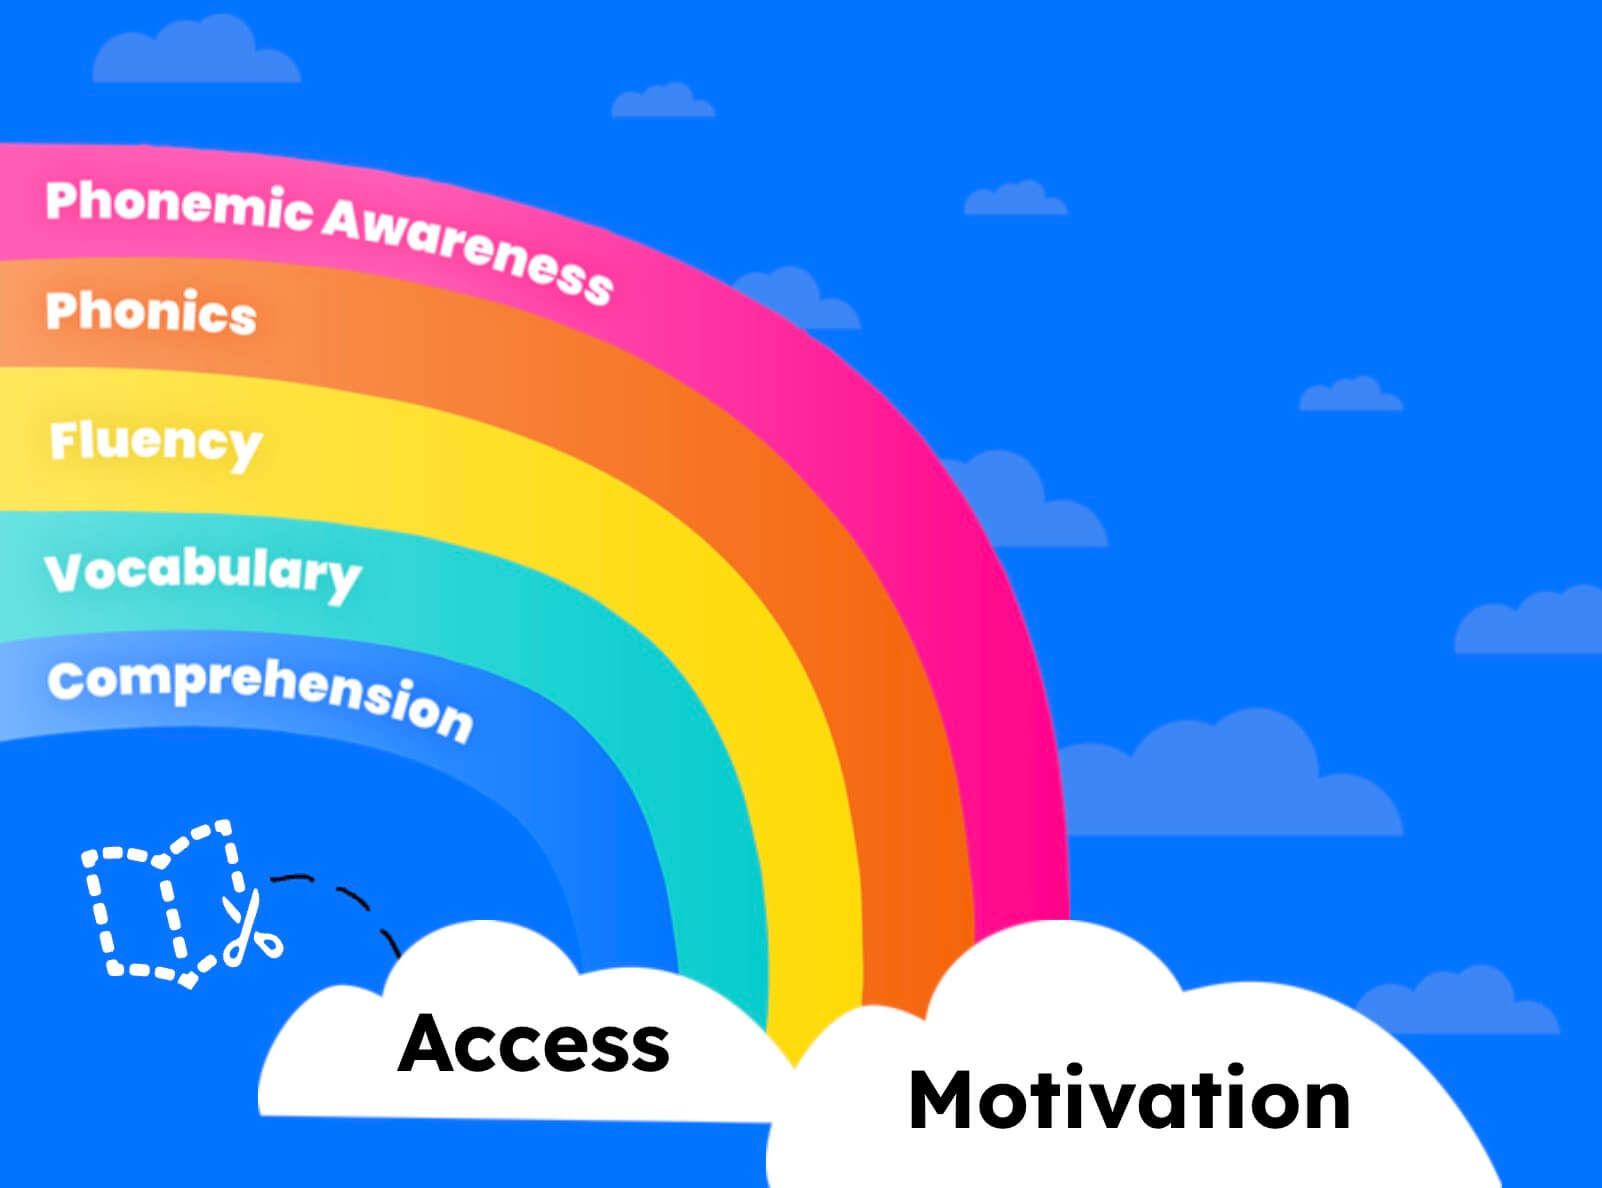 The 5 pillars of literacy in a rainbow, with Access and Motivation as the clouds providing the foundation